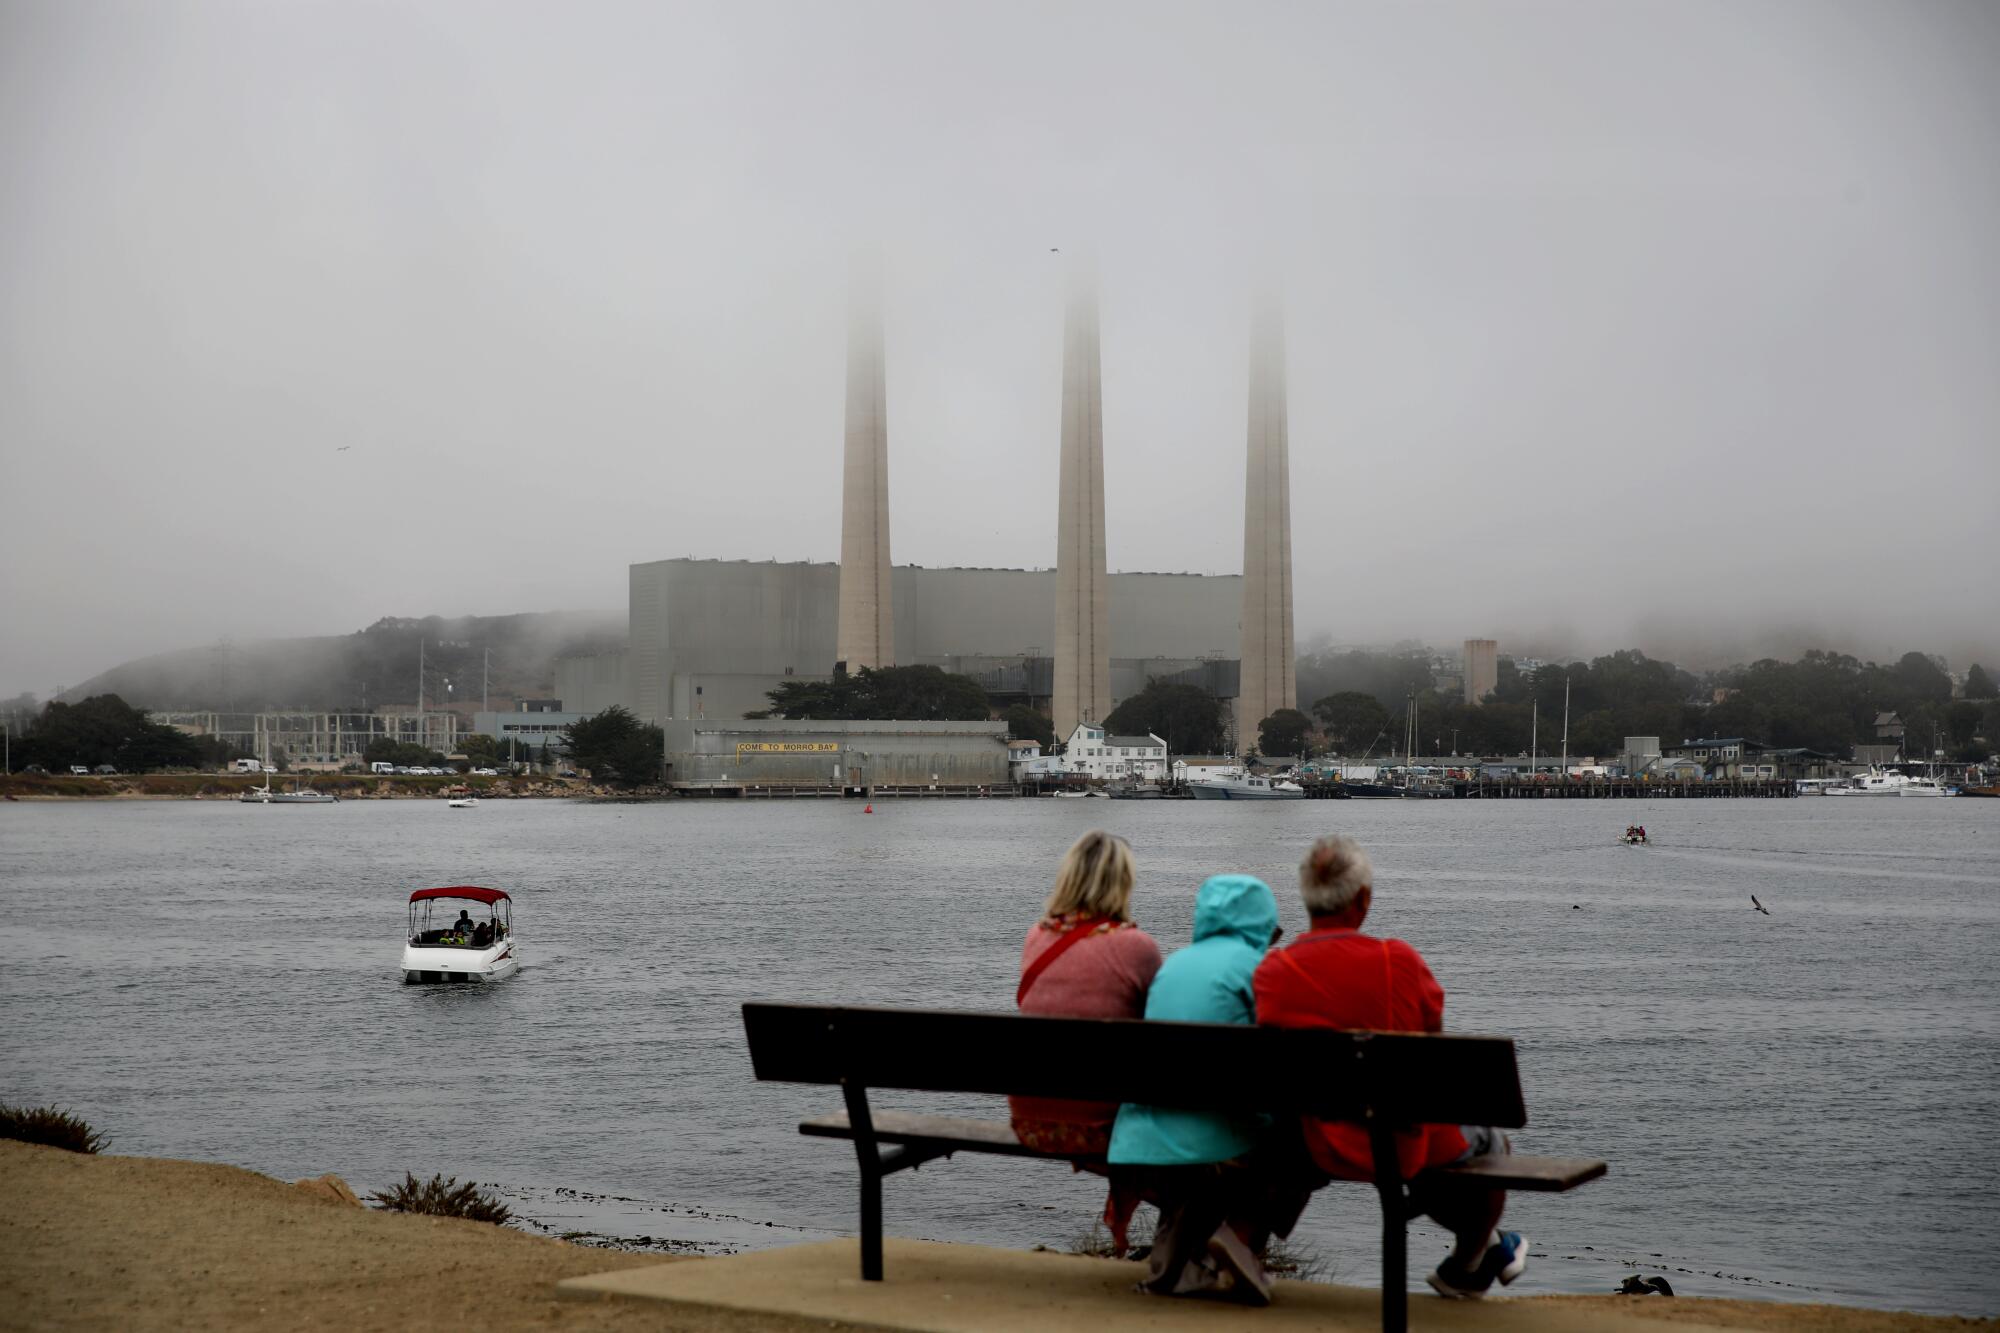 Three people sit on a bench overlooking the sea with a power plant and three smokestacks in the background